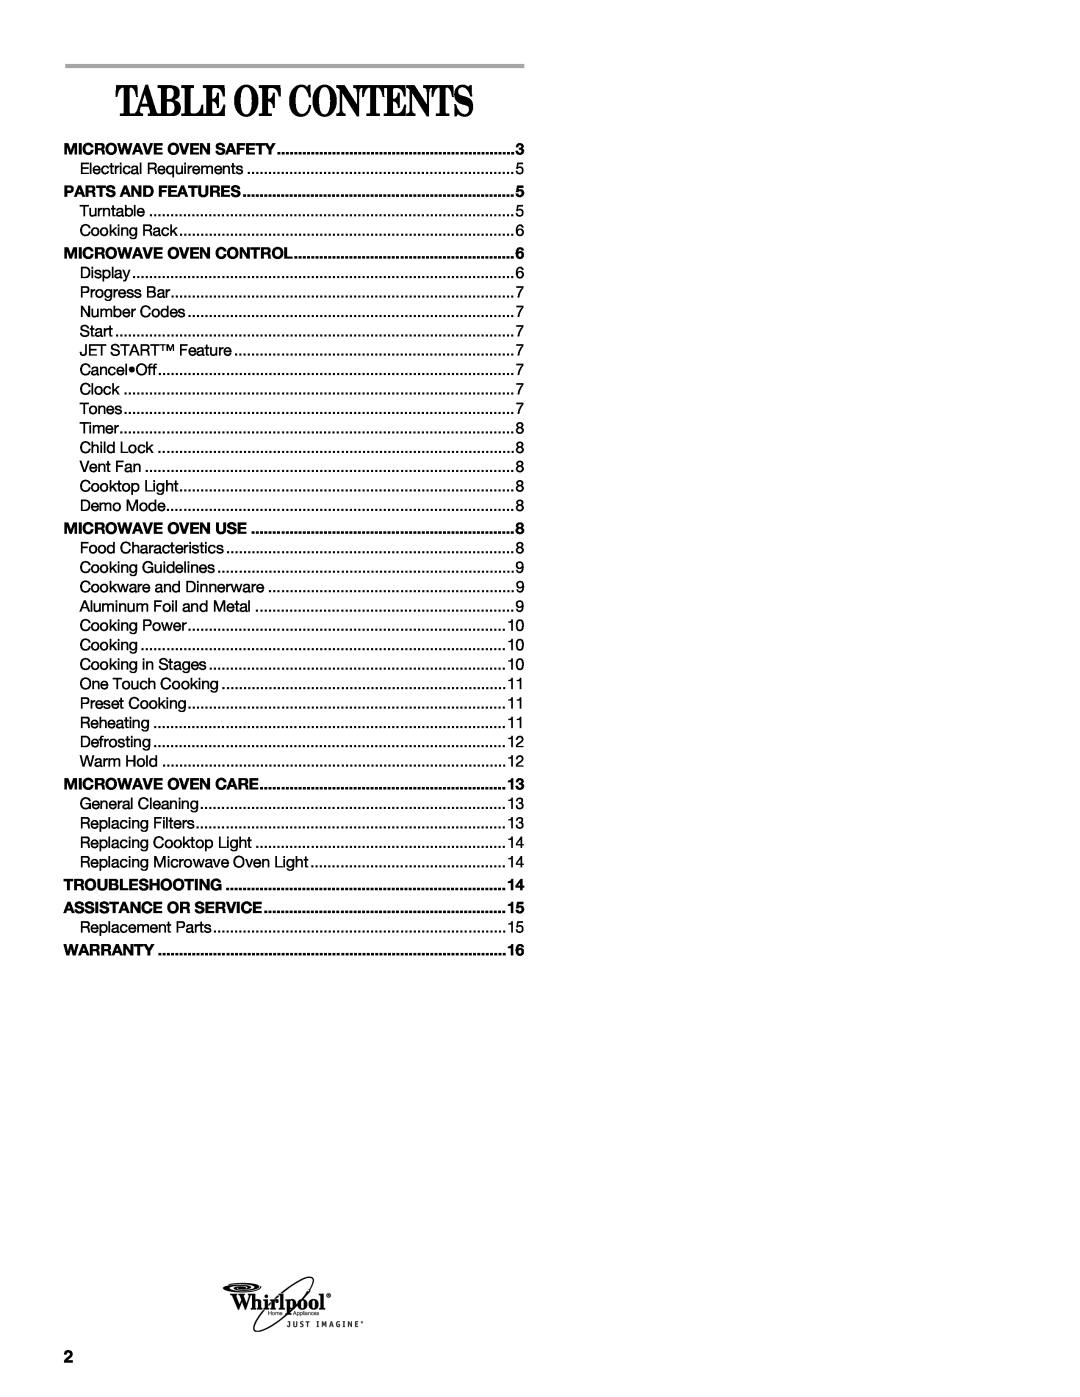 Whirlpool MH8150XM manual Table Of Contents 